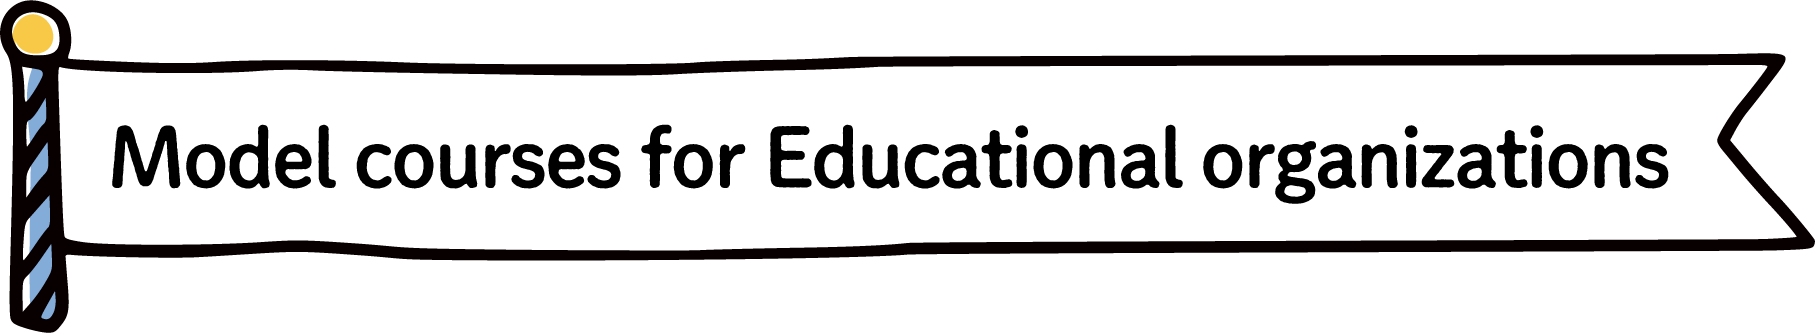 Model courses for Educational organizations